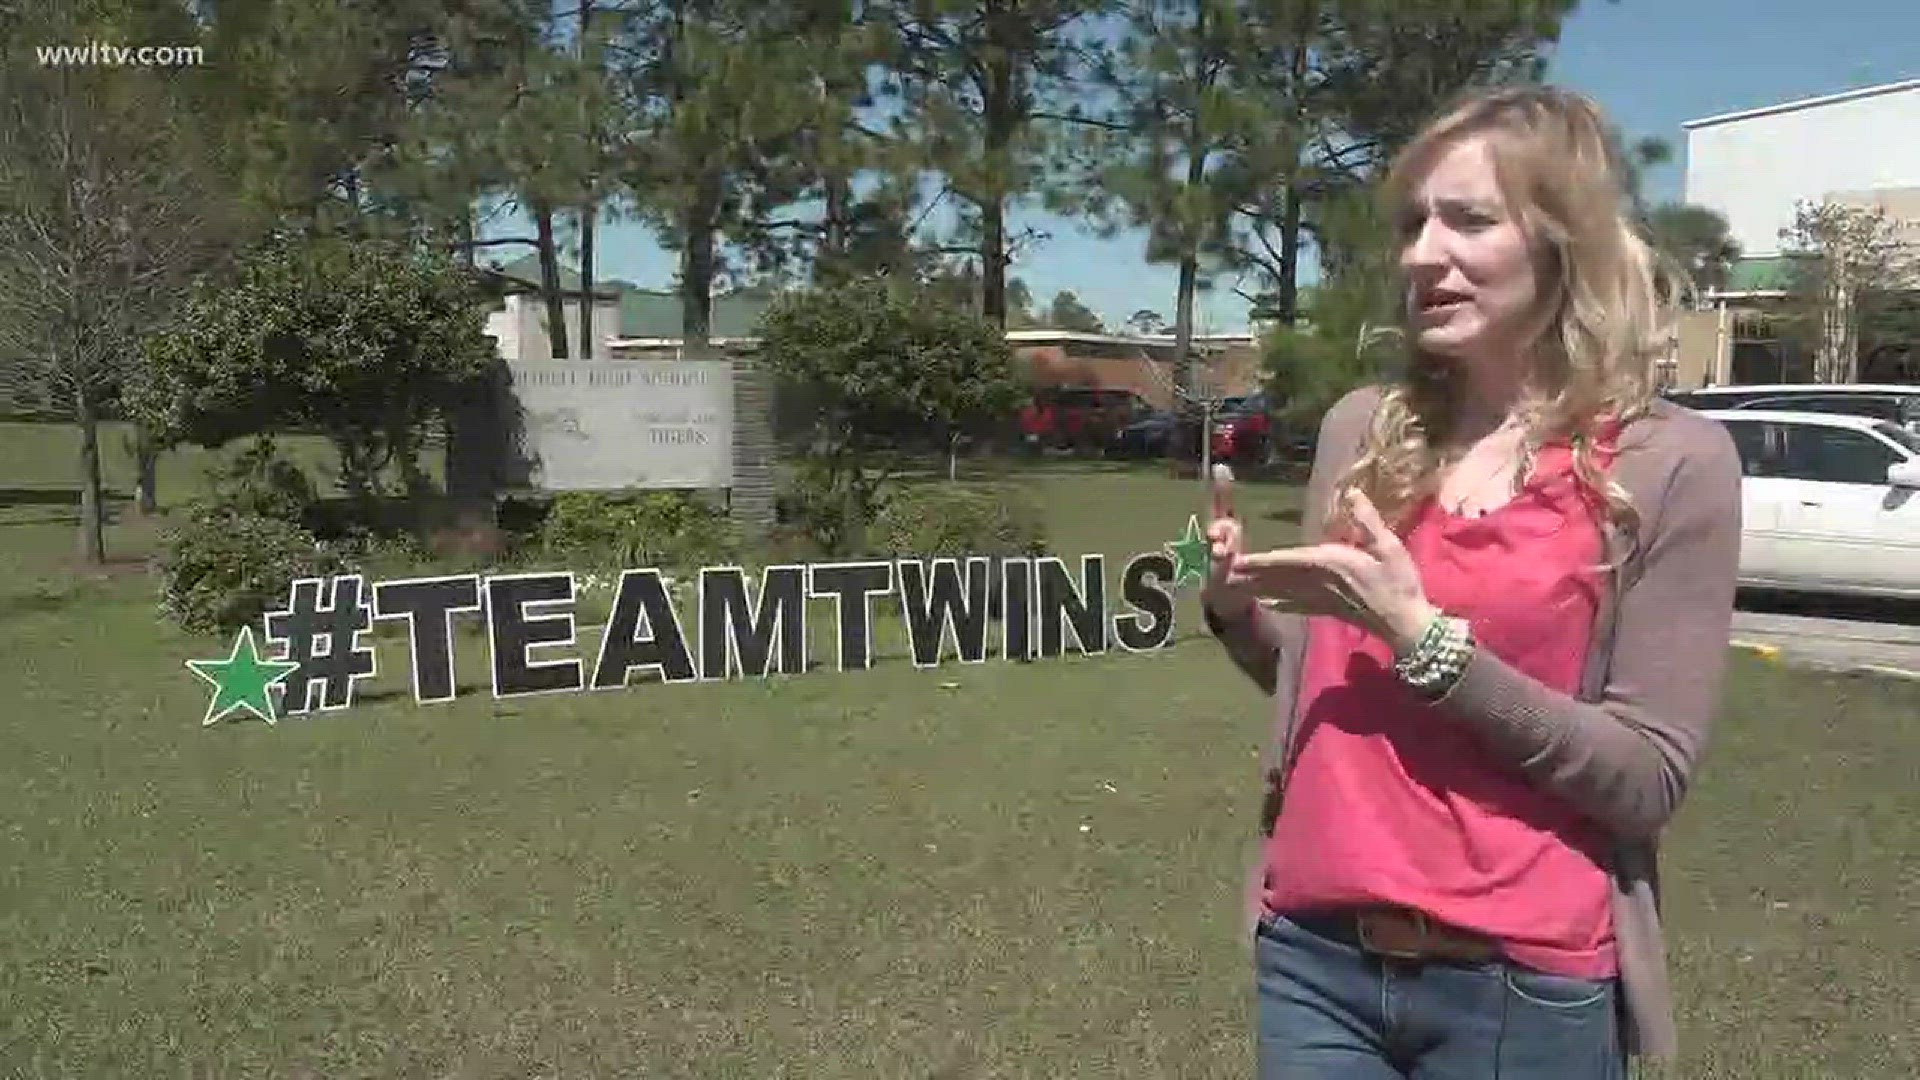 Slidell twin leaves behind legacy after battle with liver disease